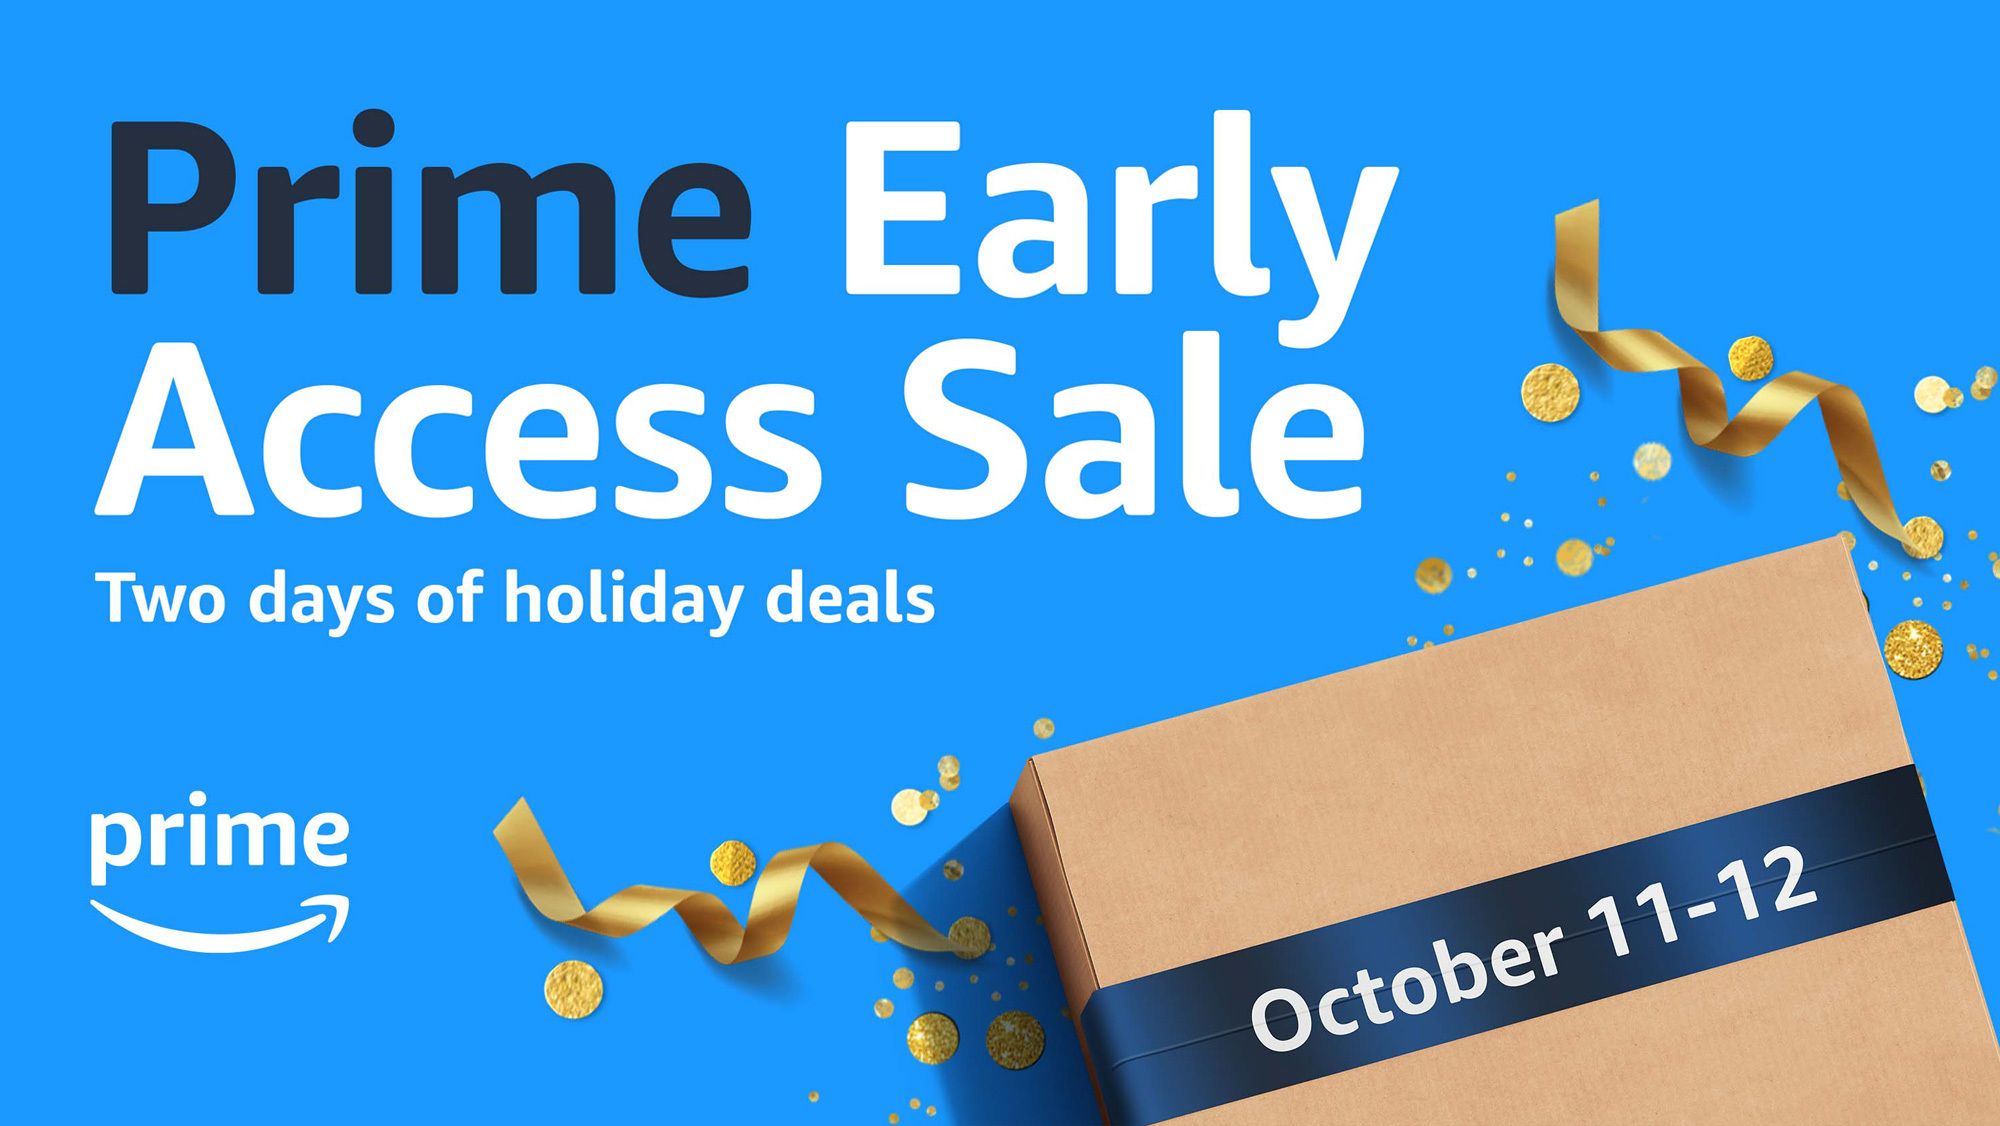 Amazon Prime Early Access Sale Cover